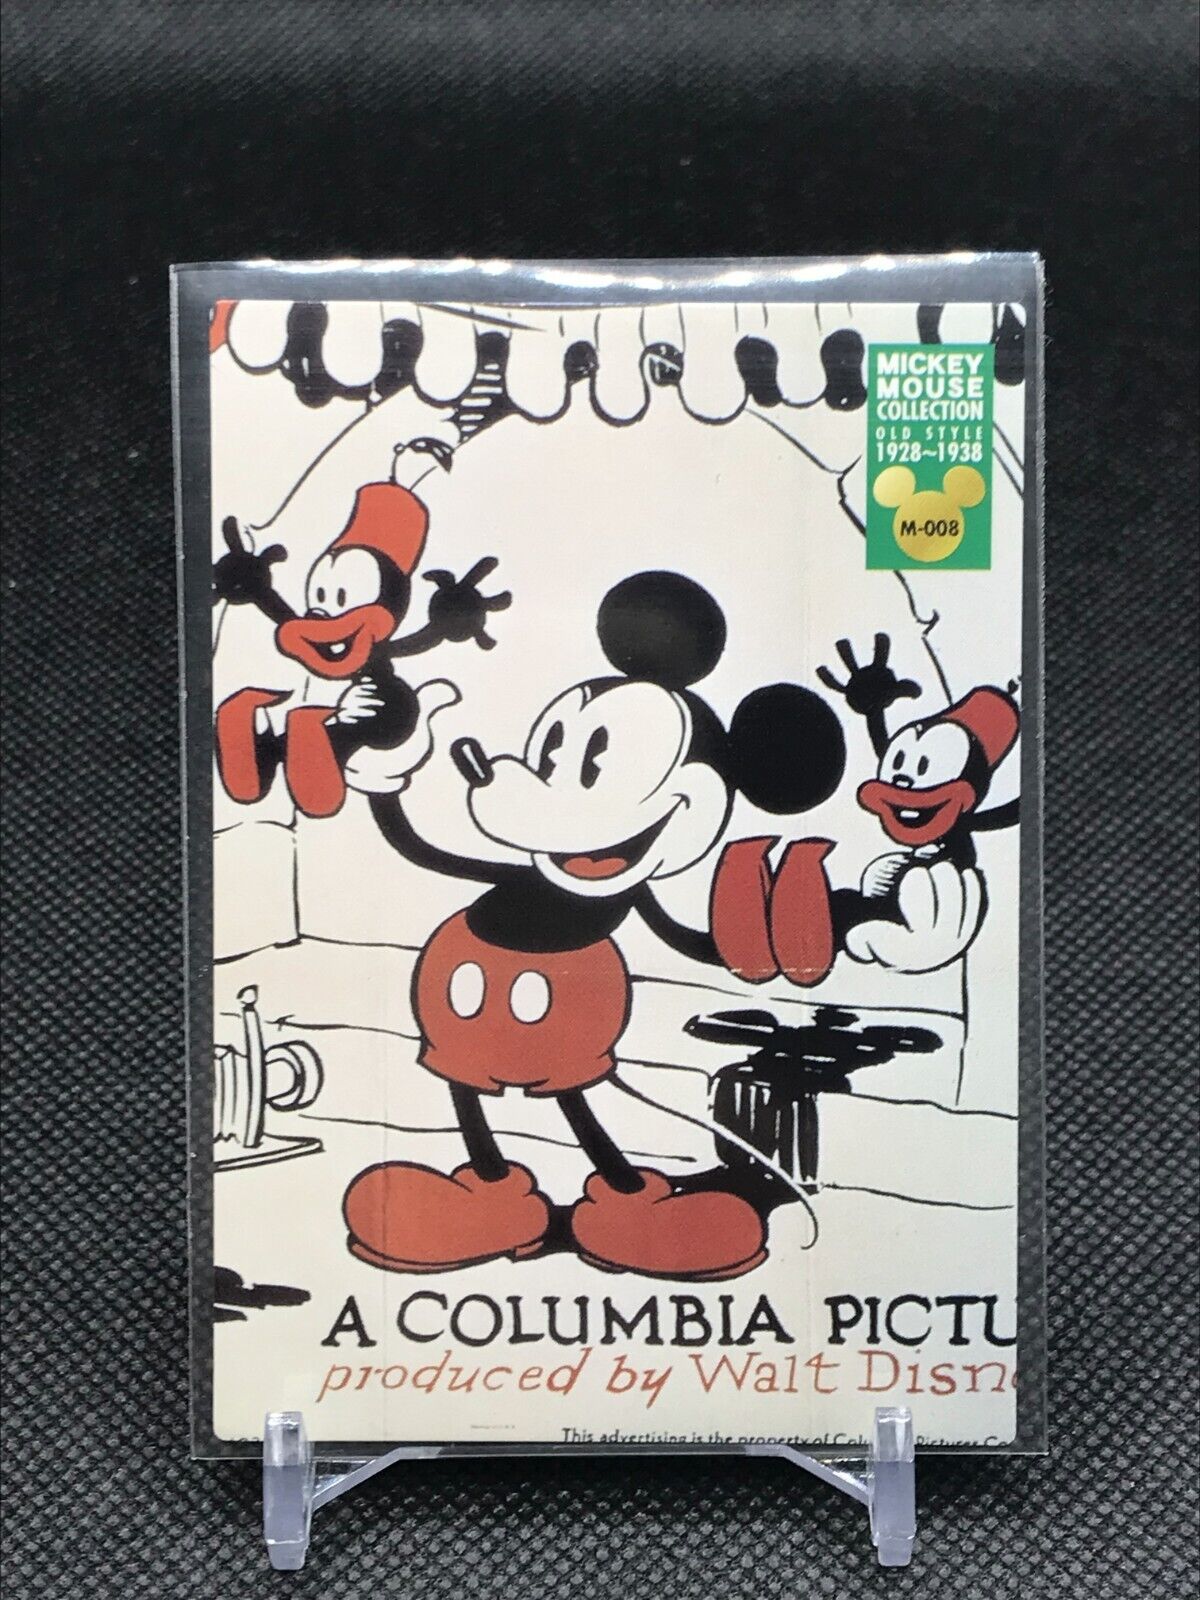 M-008 MICKEY MOUSE COLLECTION OLD STYLE 1928~1938 Made in JAPAN 1999 | eBay